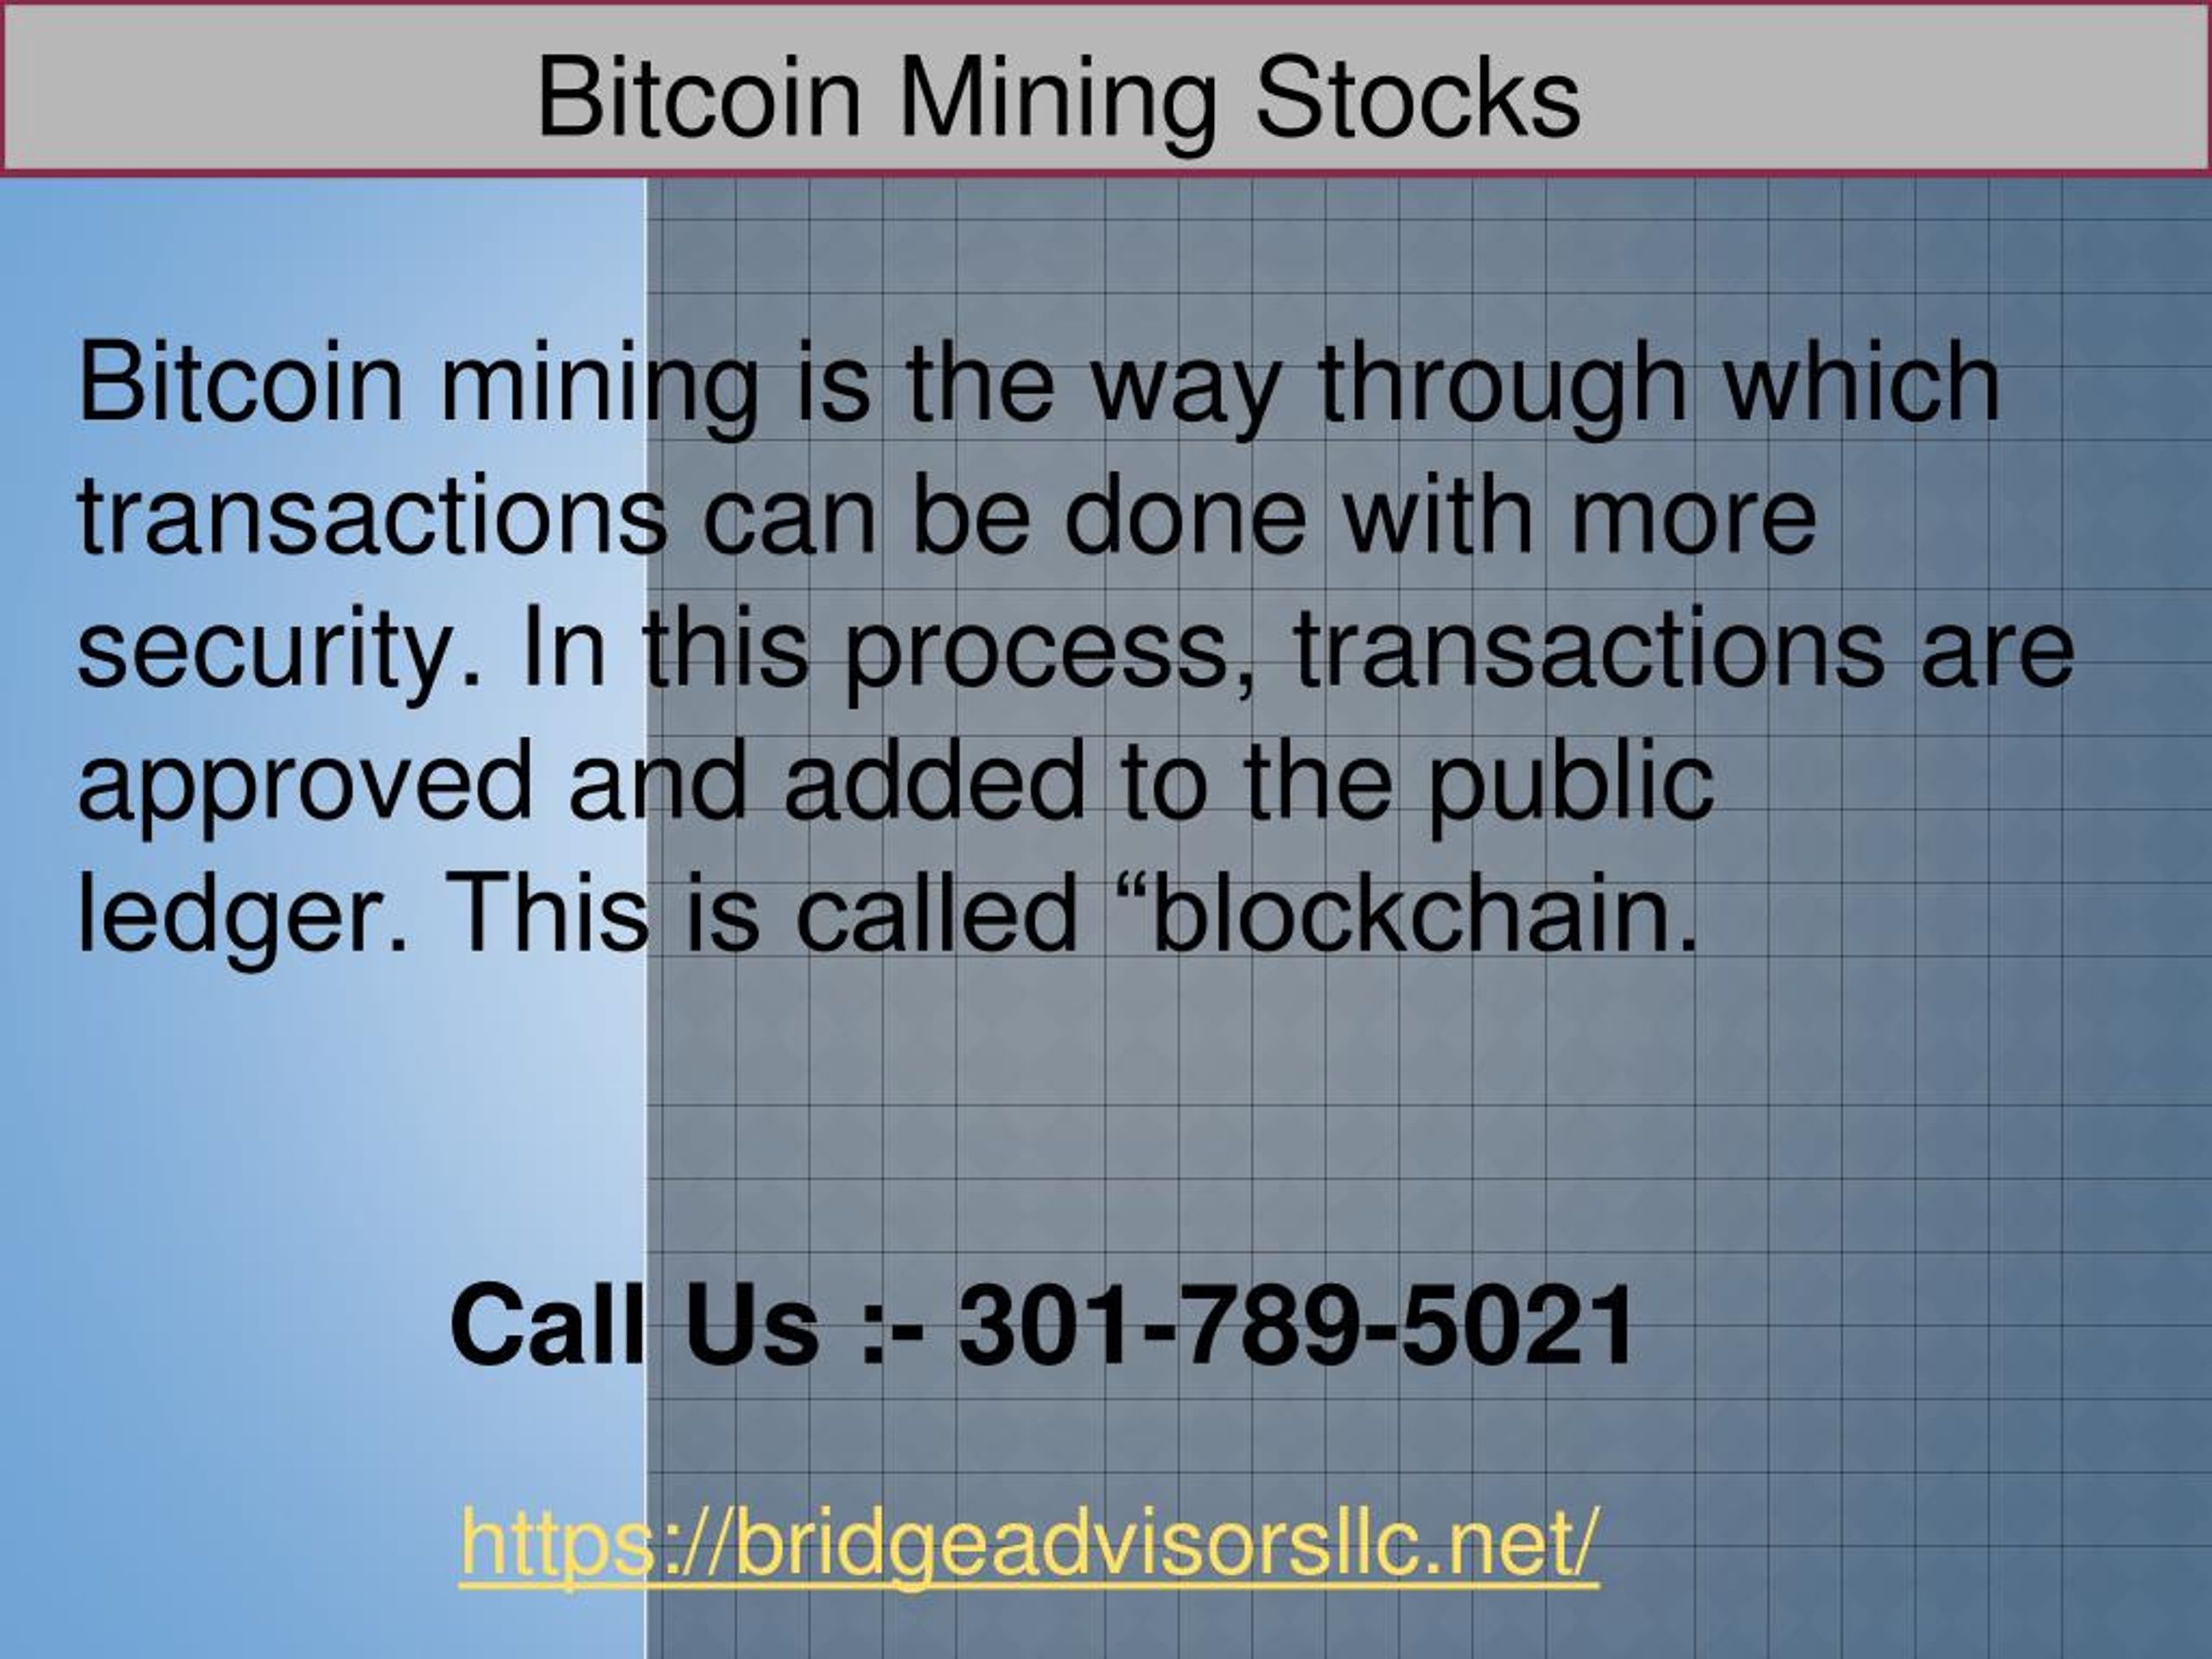 Ppt Want To Know About Bitcoin Mining Stocks Bridges Advisors - 